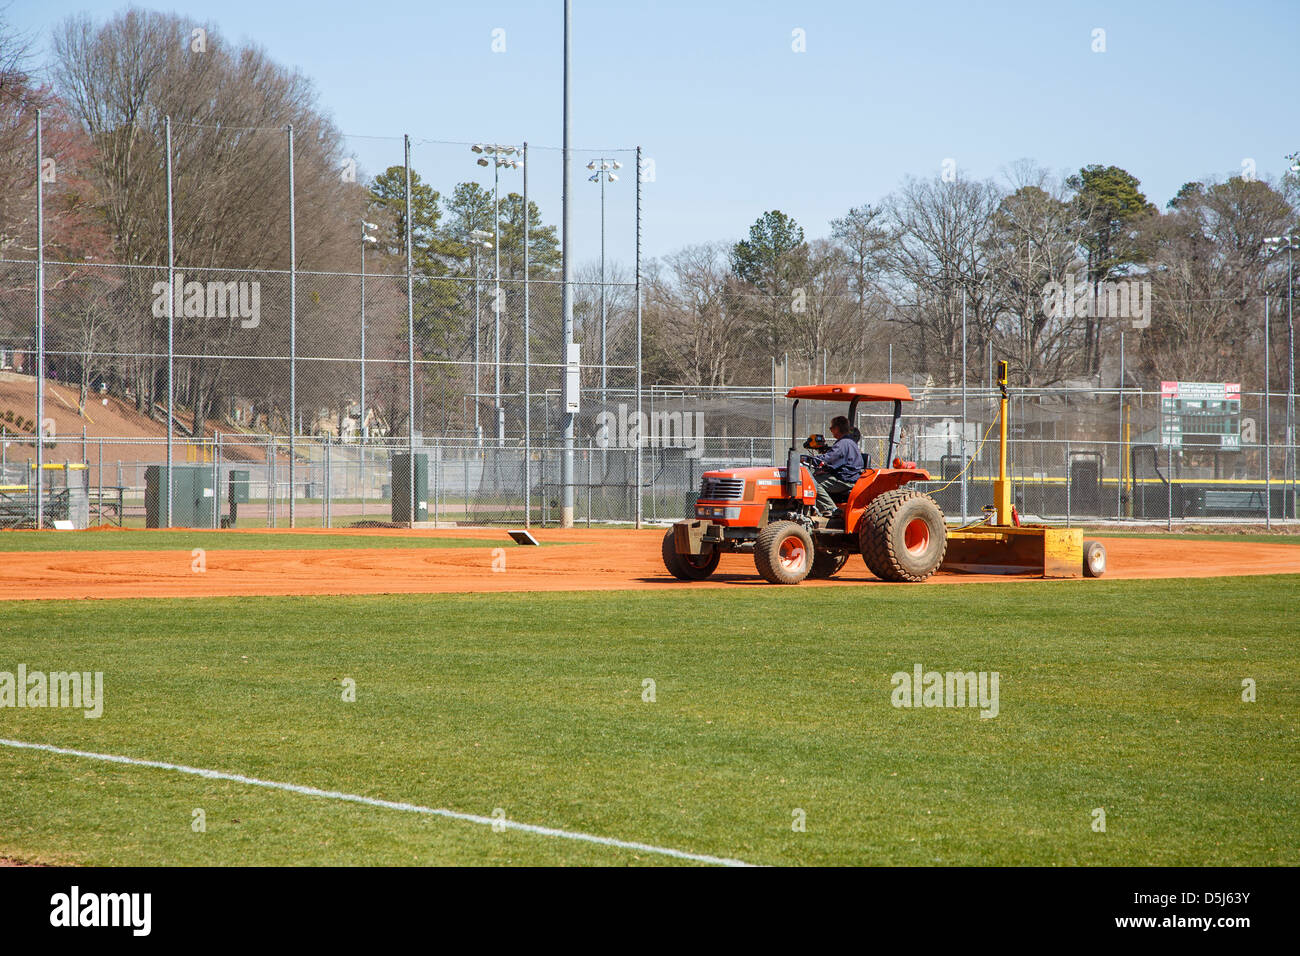 A man driving landscaping equipment across infield of little league baseball field in the spring Stock Photo